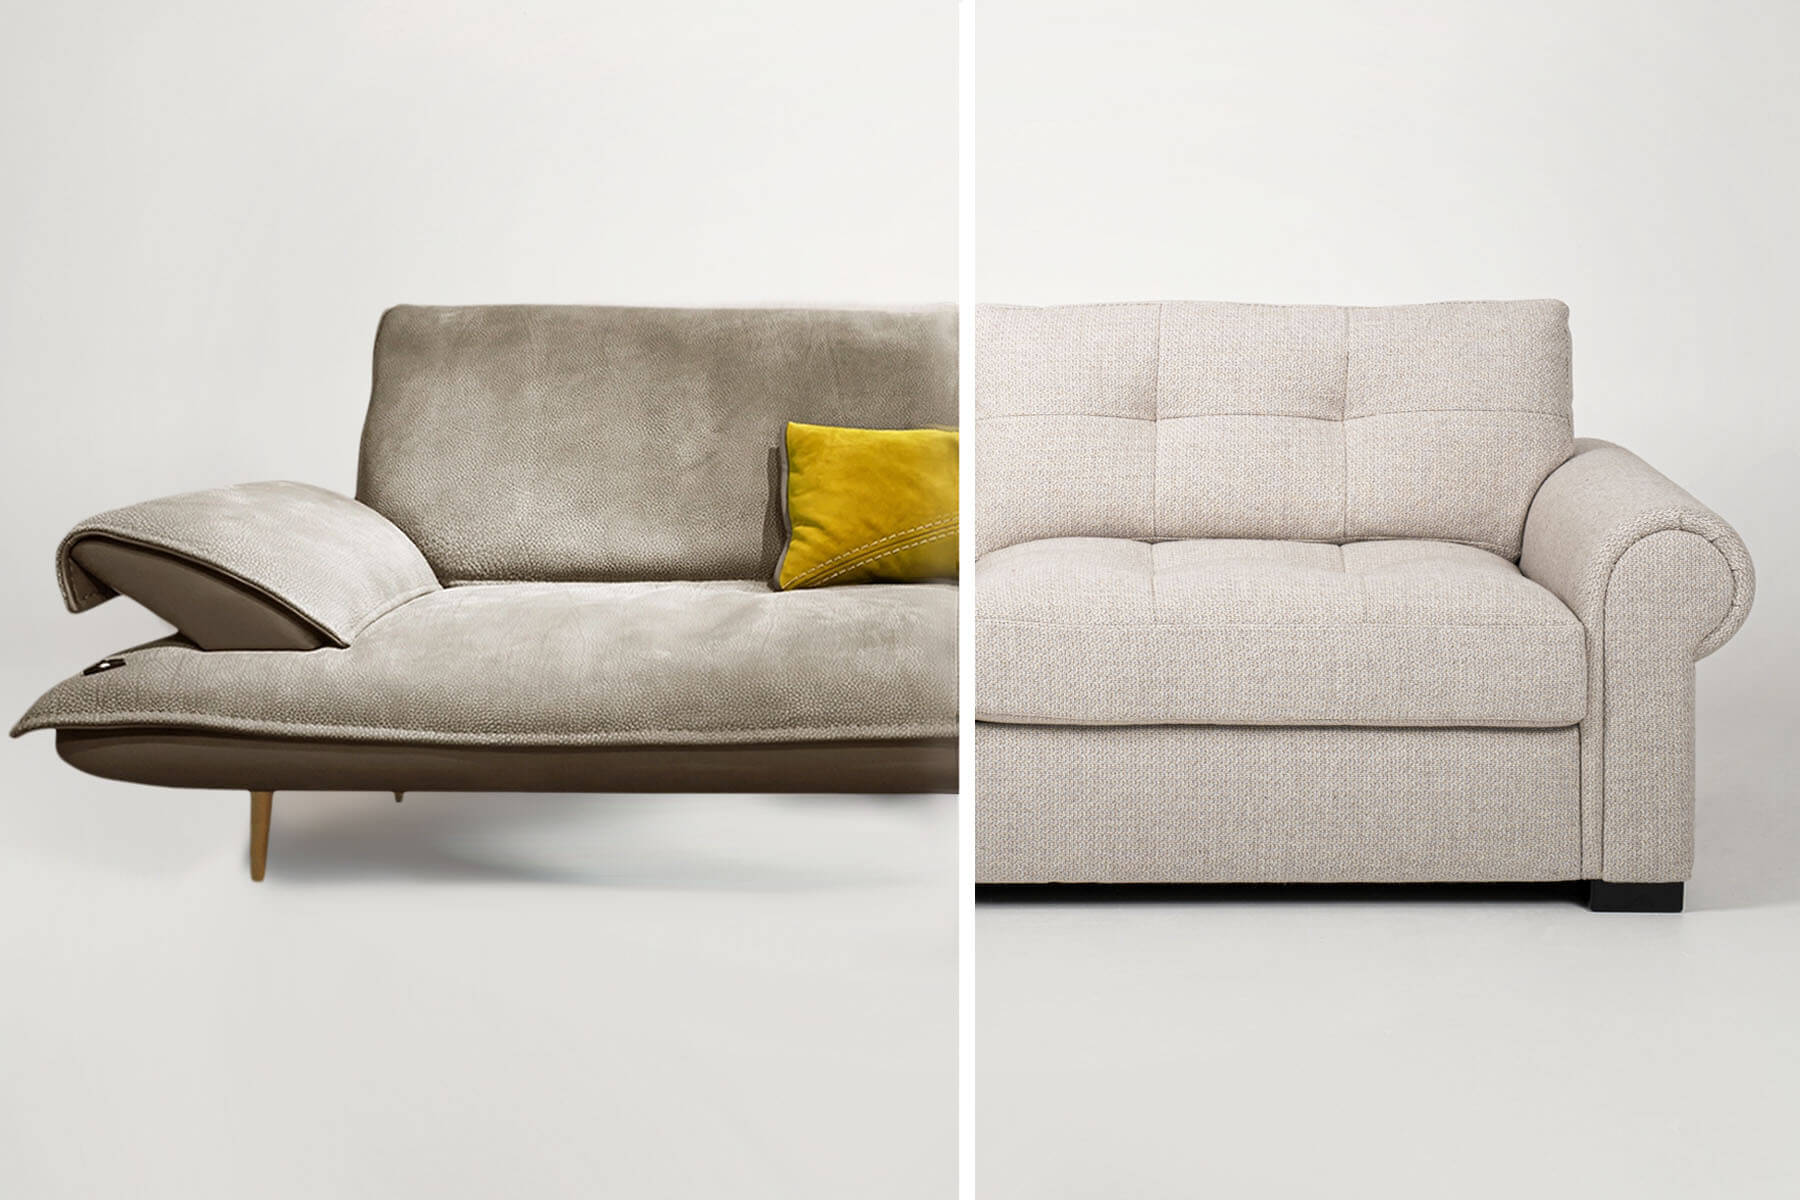 couch vs sofa bed